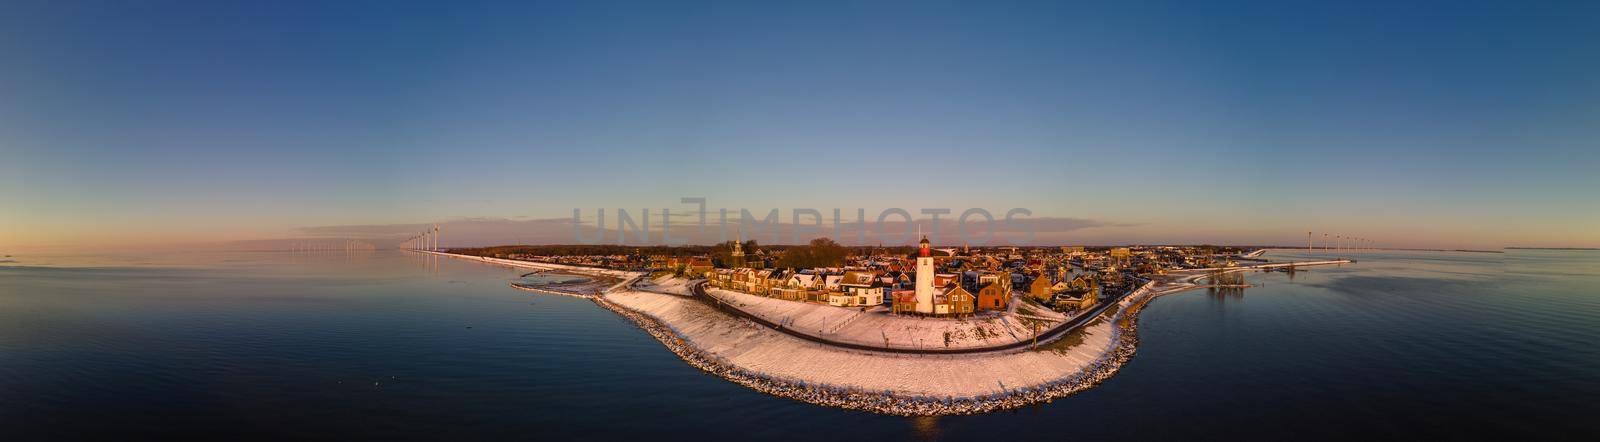 Panoramic view at the lighthouse of Urk Flevoland Netherlands, Urk during winter with white snow covered the beach. Winter in the Netherlands